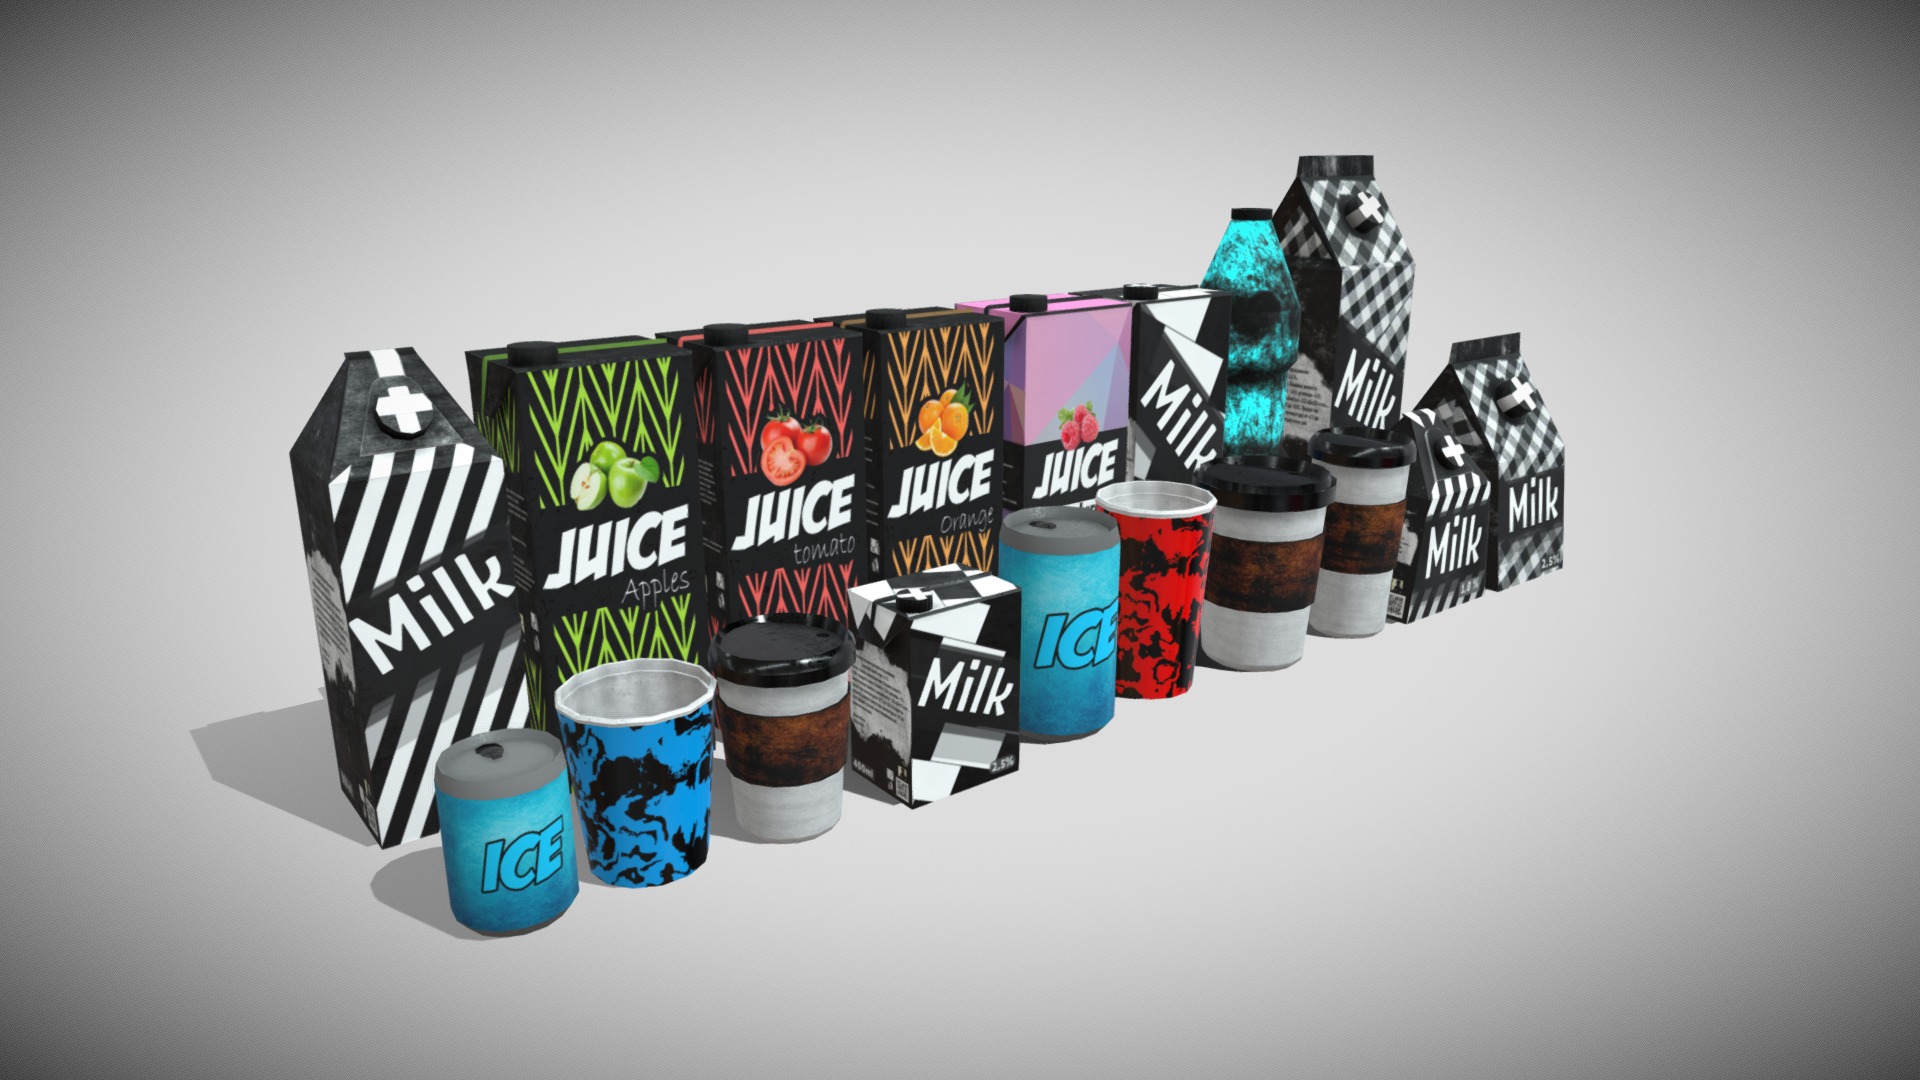 3D model Beverages Drinks and Bottles PUT AN ASTERISK - This is a 3D model of the Beverages Drinks and Bottles PUT AN ASTERISK. The 3D model is about a group of coffee cups.